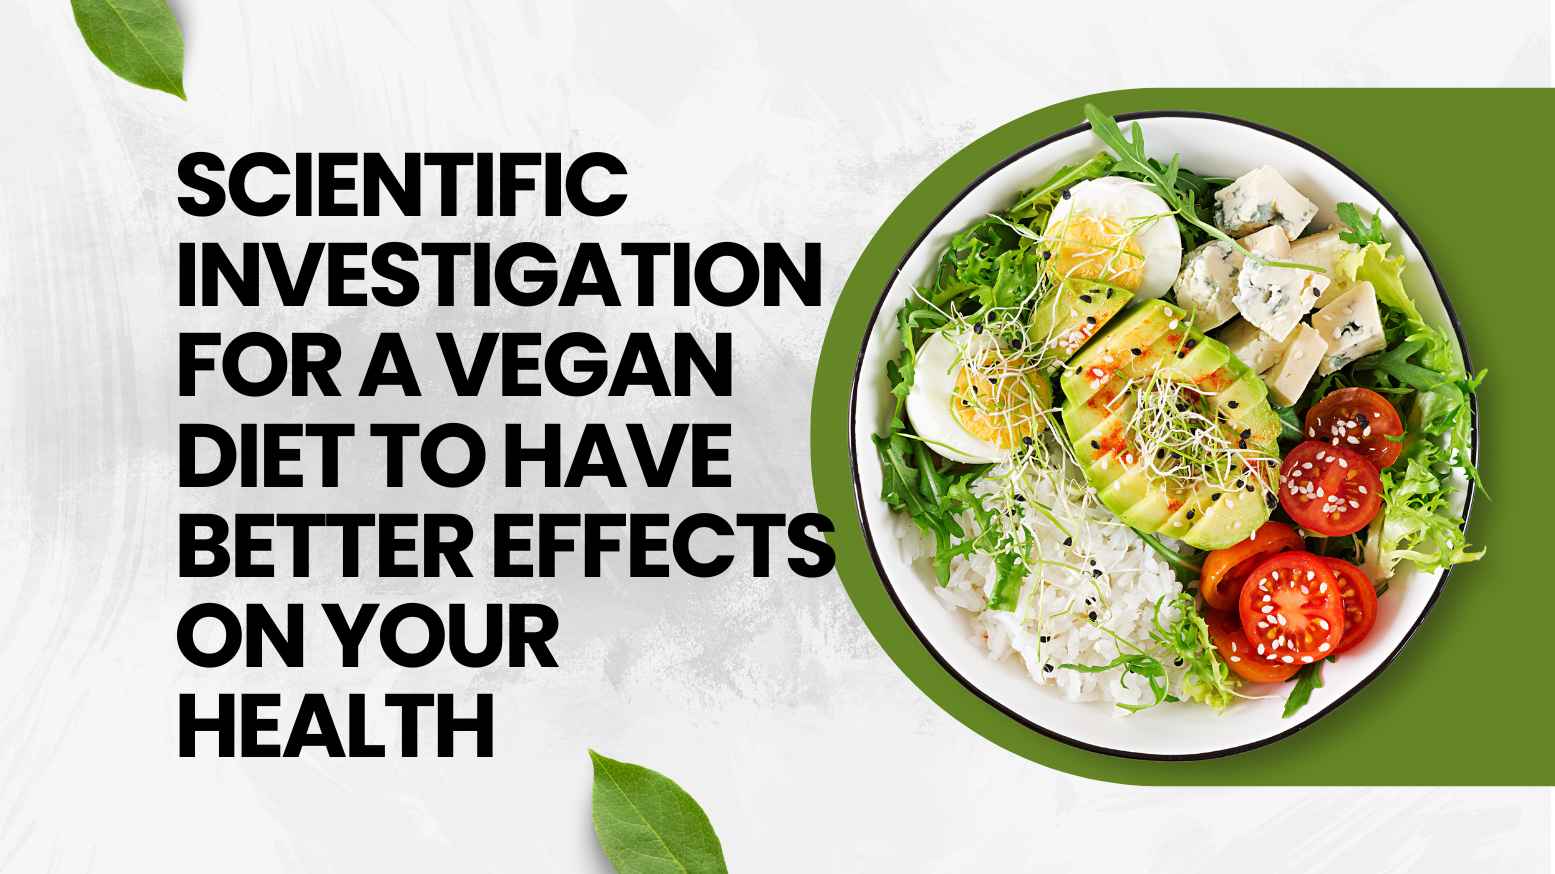 scientific investigation for a vegan diet to have better effects on your health